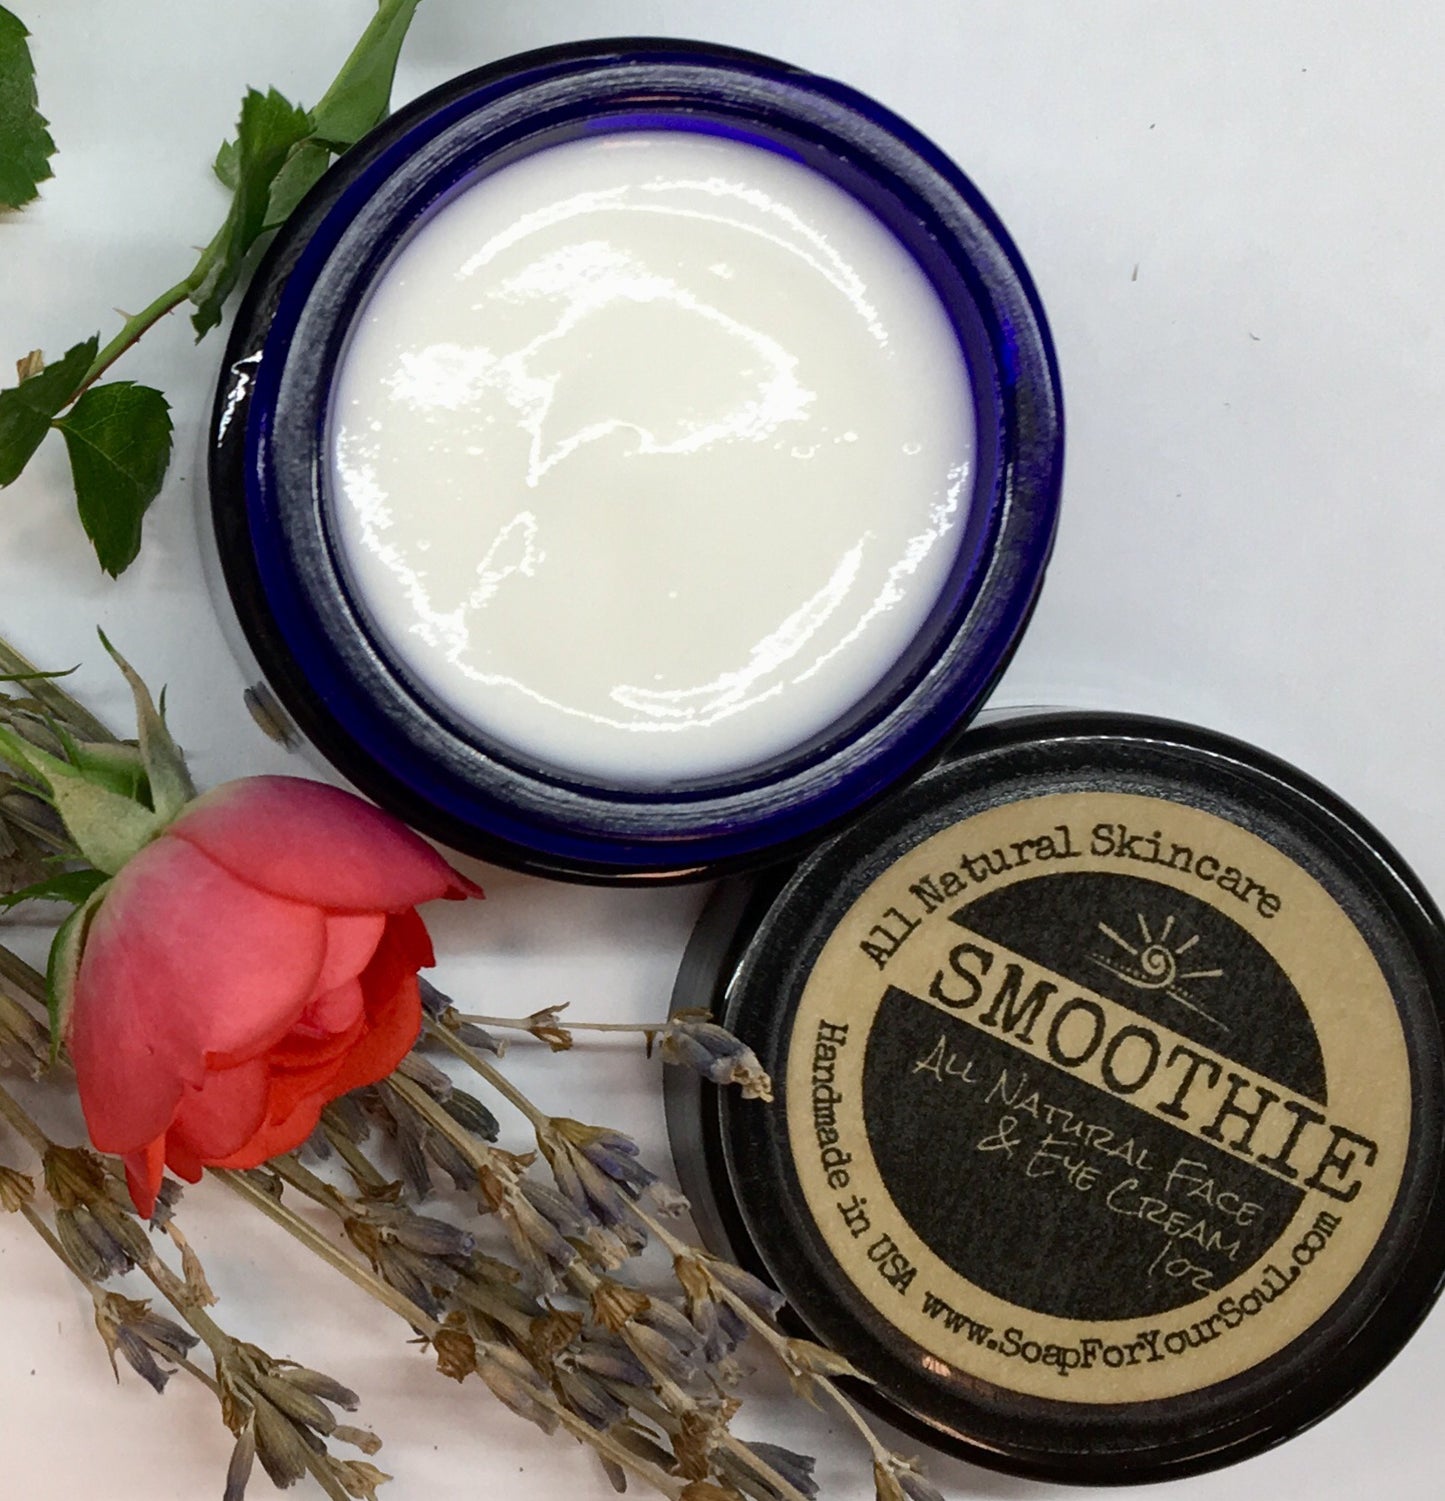 Smoothie - Eye and face cream